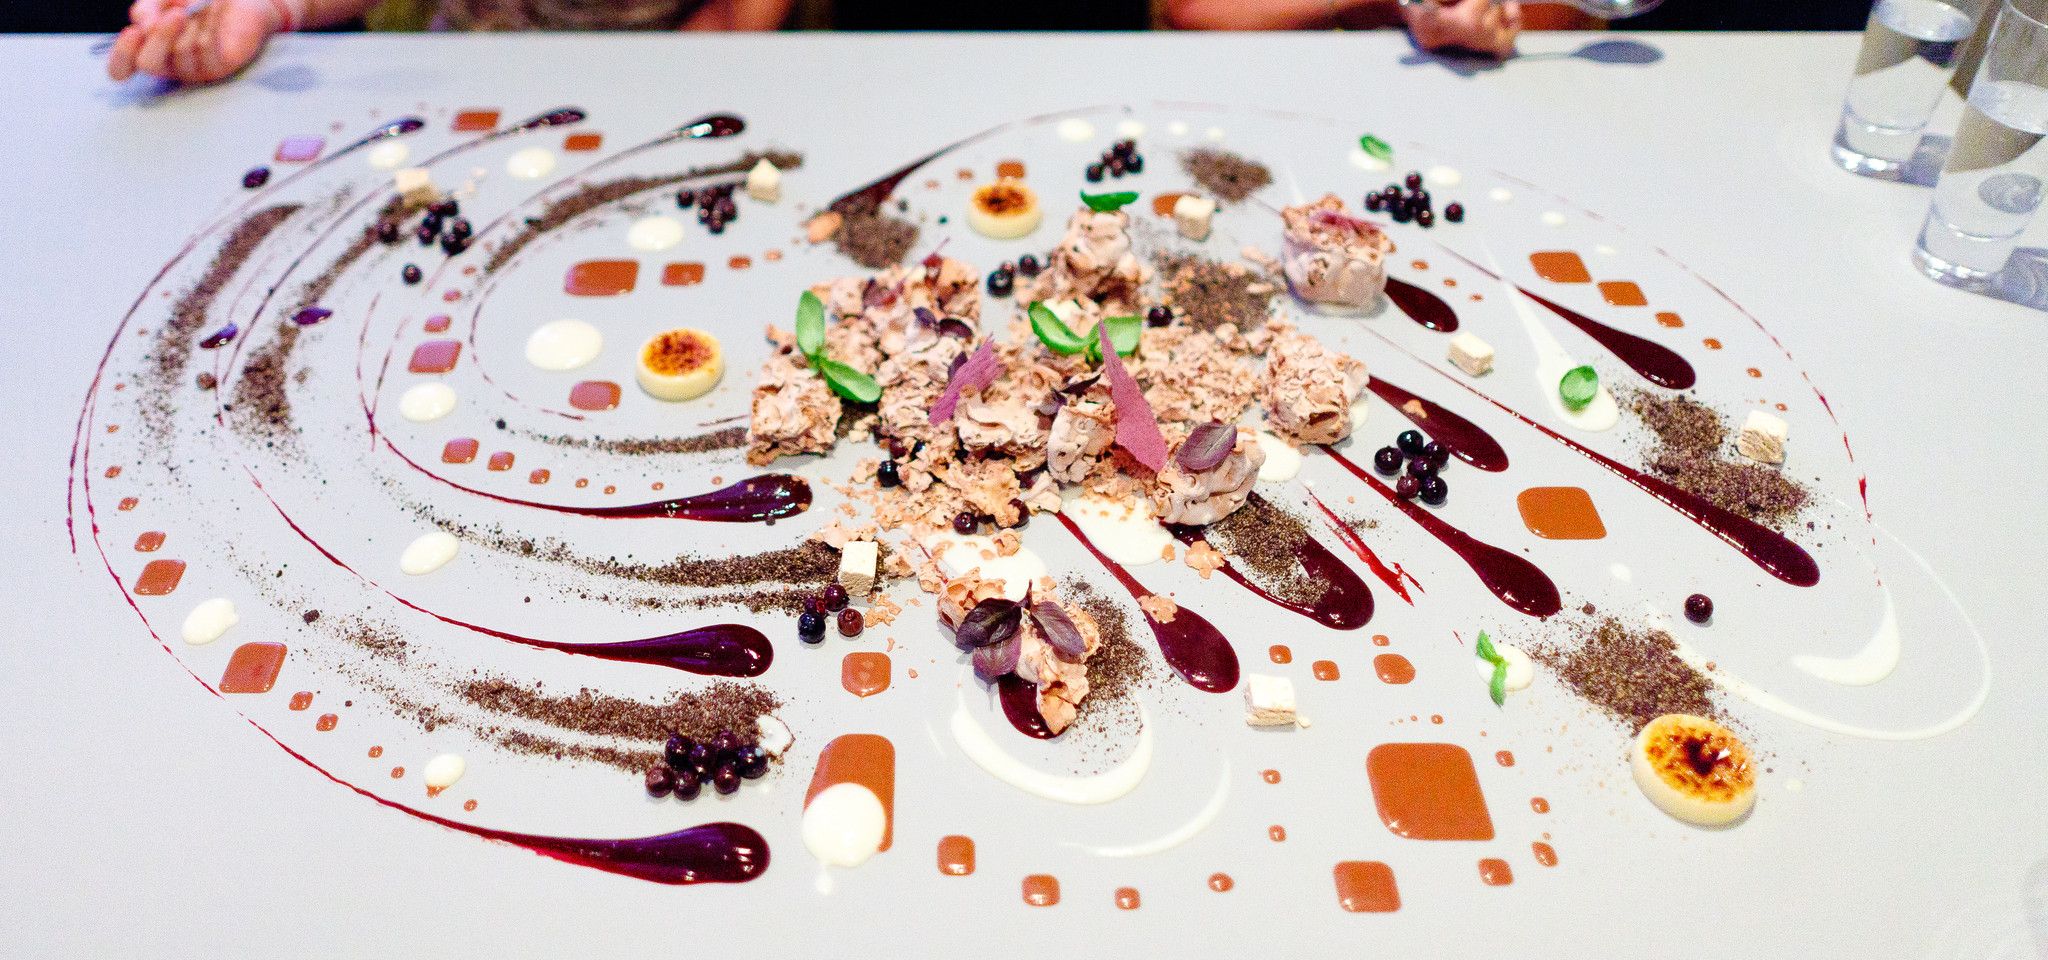 Alinea Canape 2 Places Nouveau Charitybuzz Enjoy Dinner at Alinea In Chicago with the